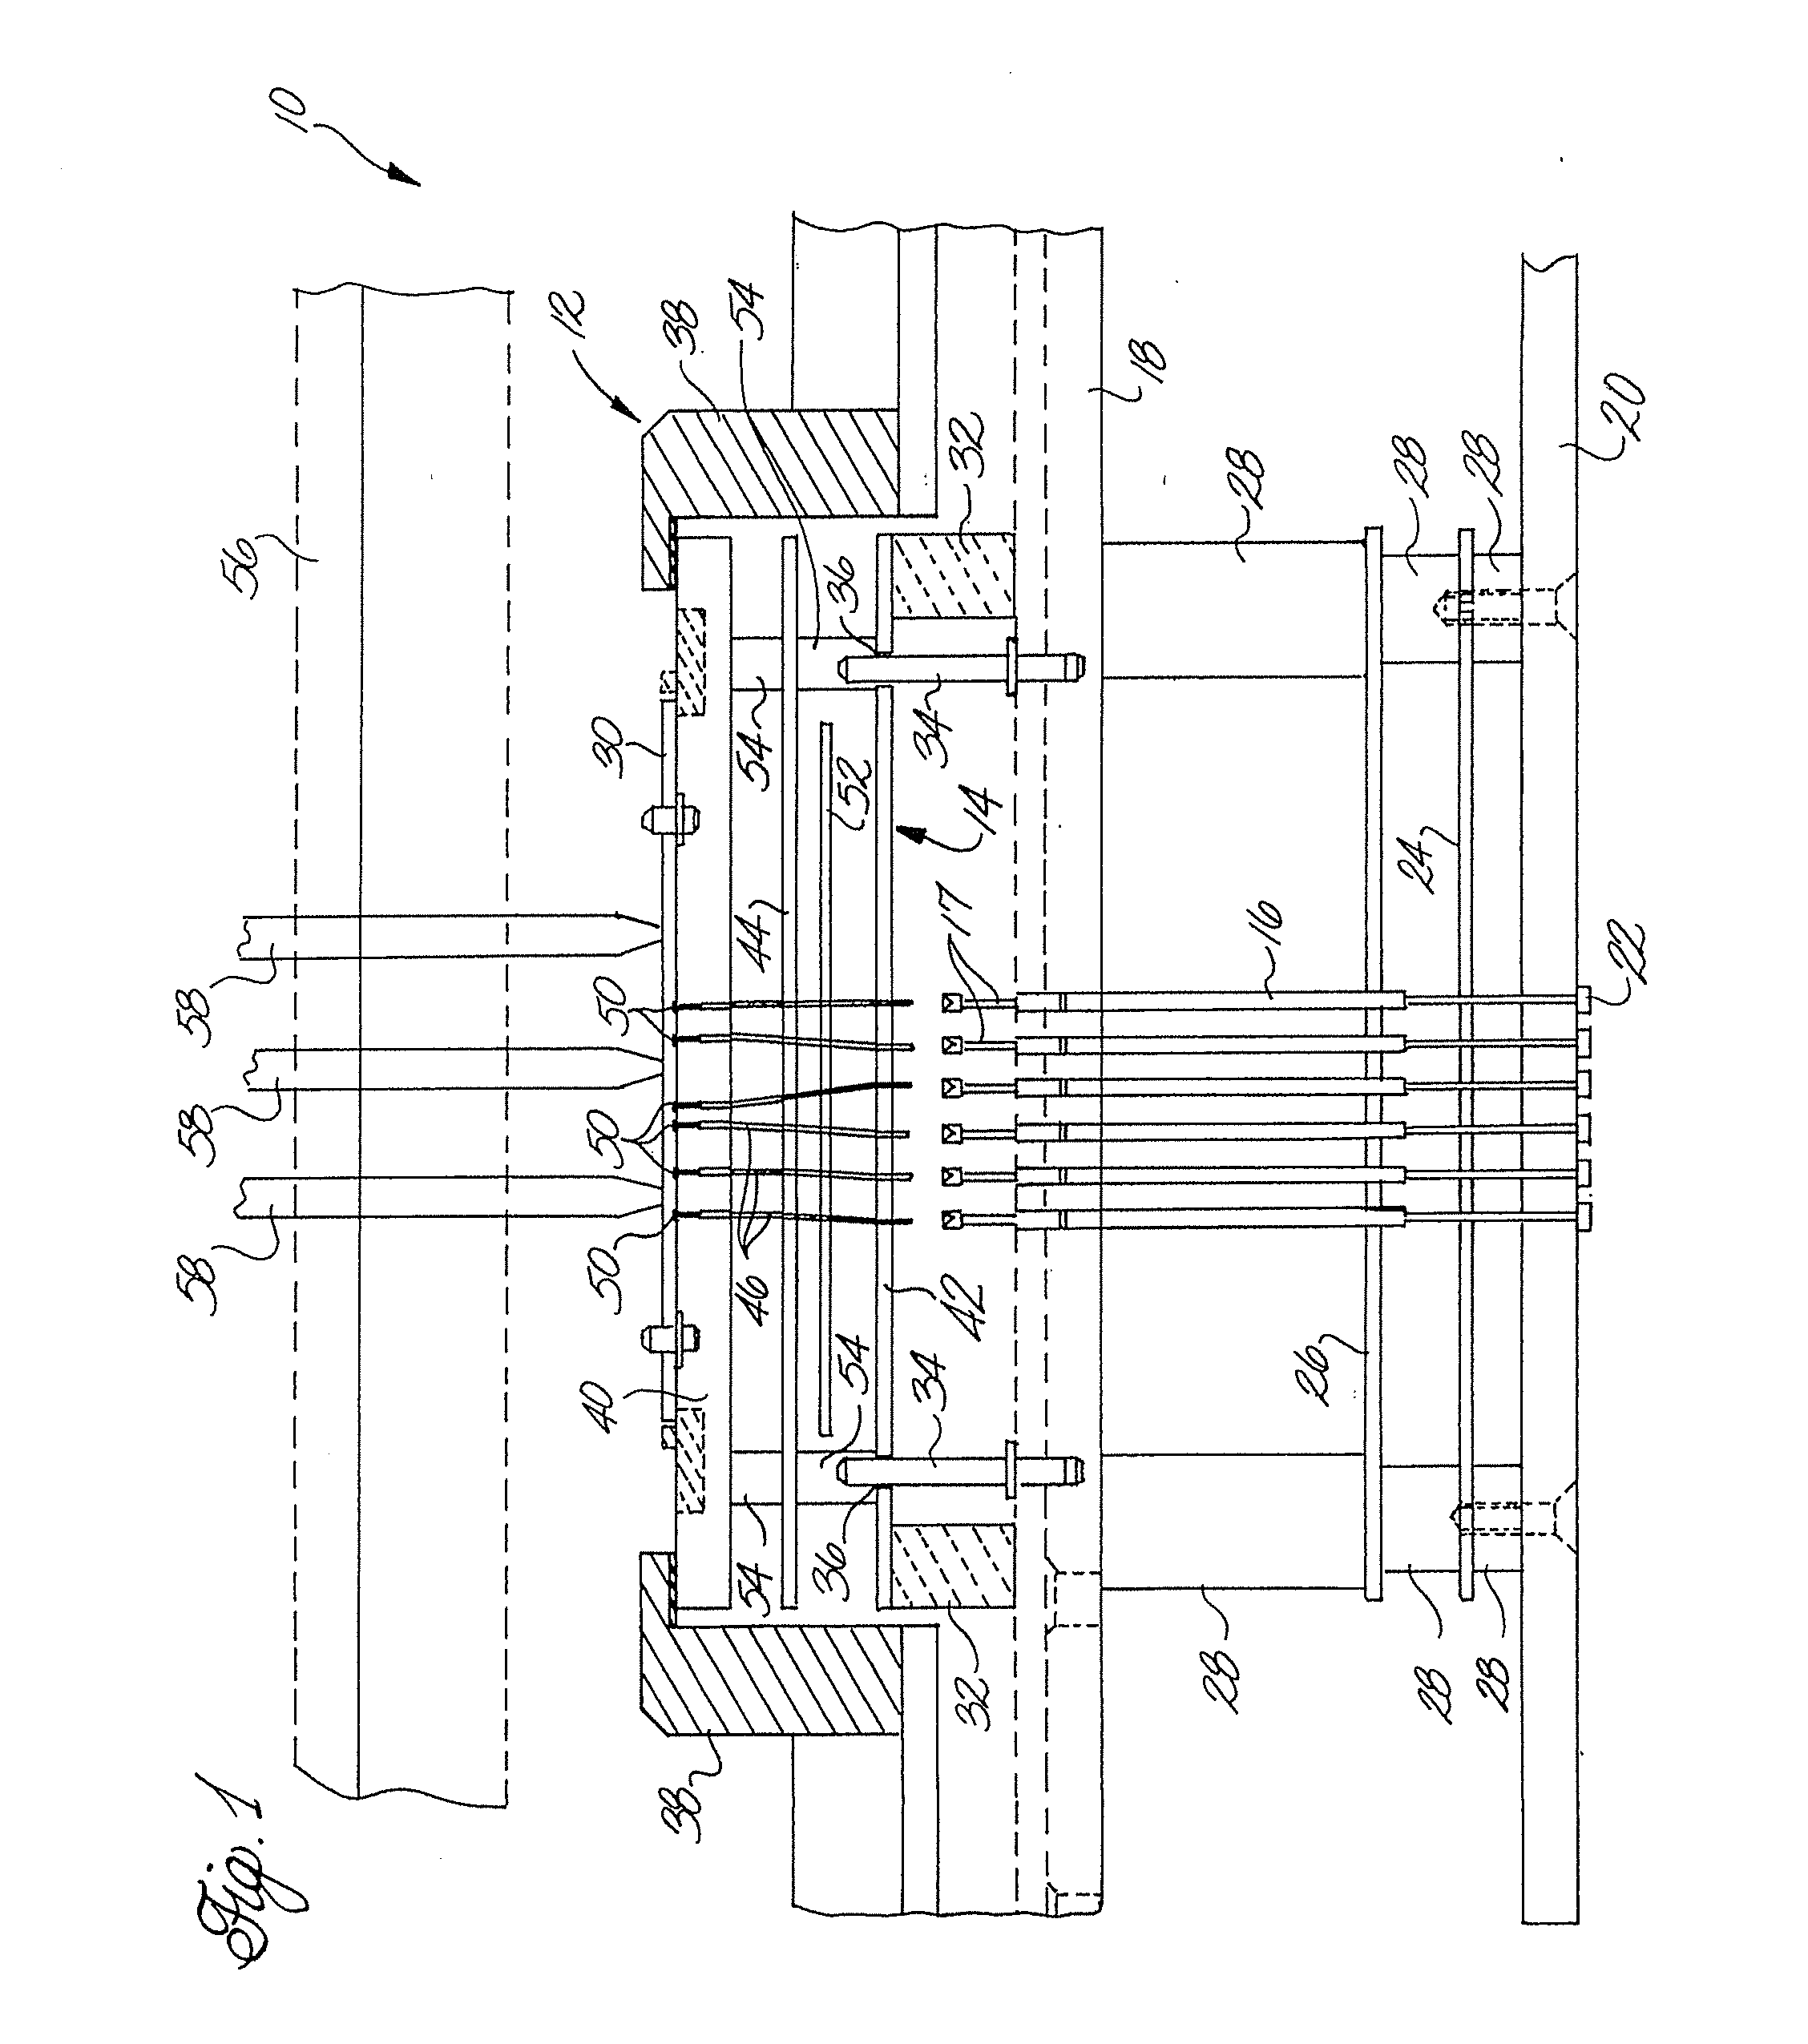 Loaded printed circuit board test fixture and method for manufacturing the same